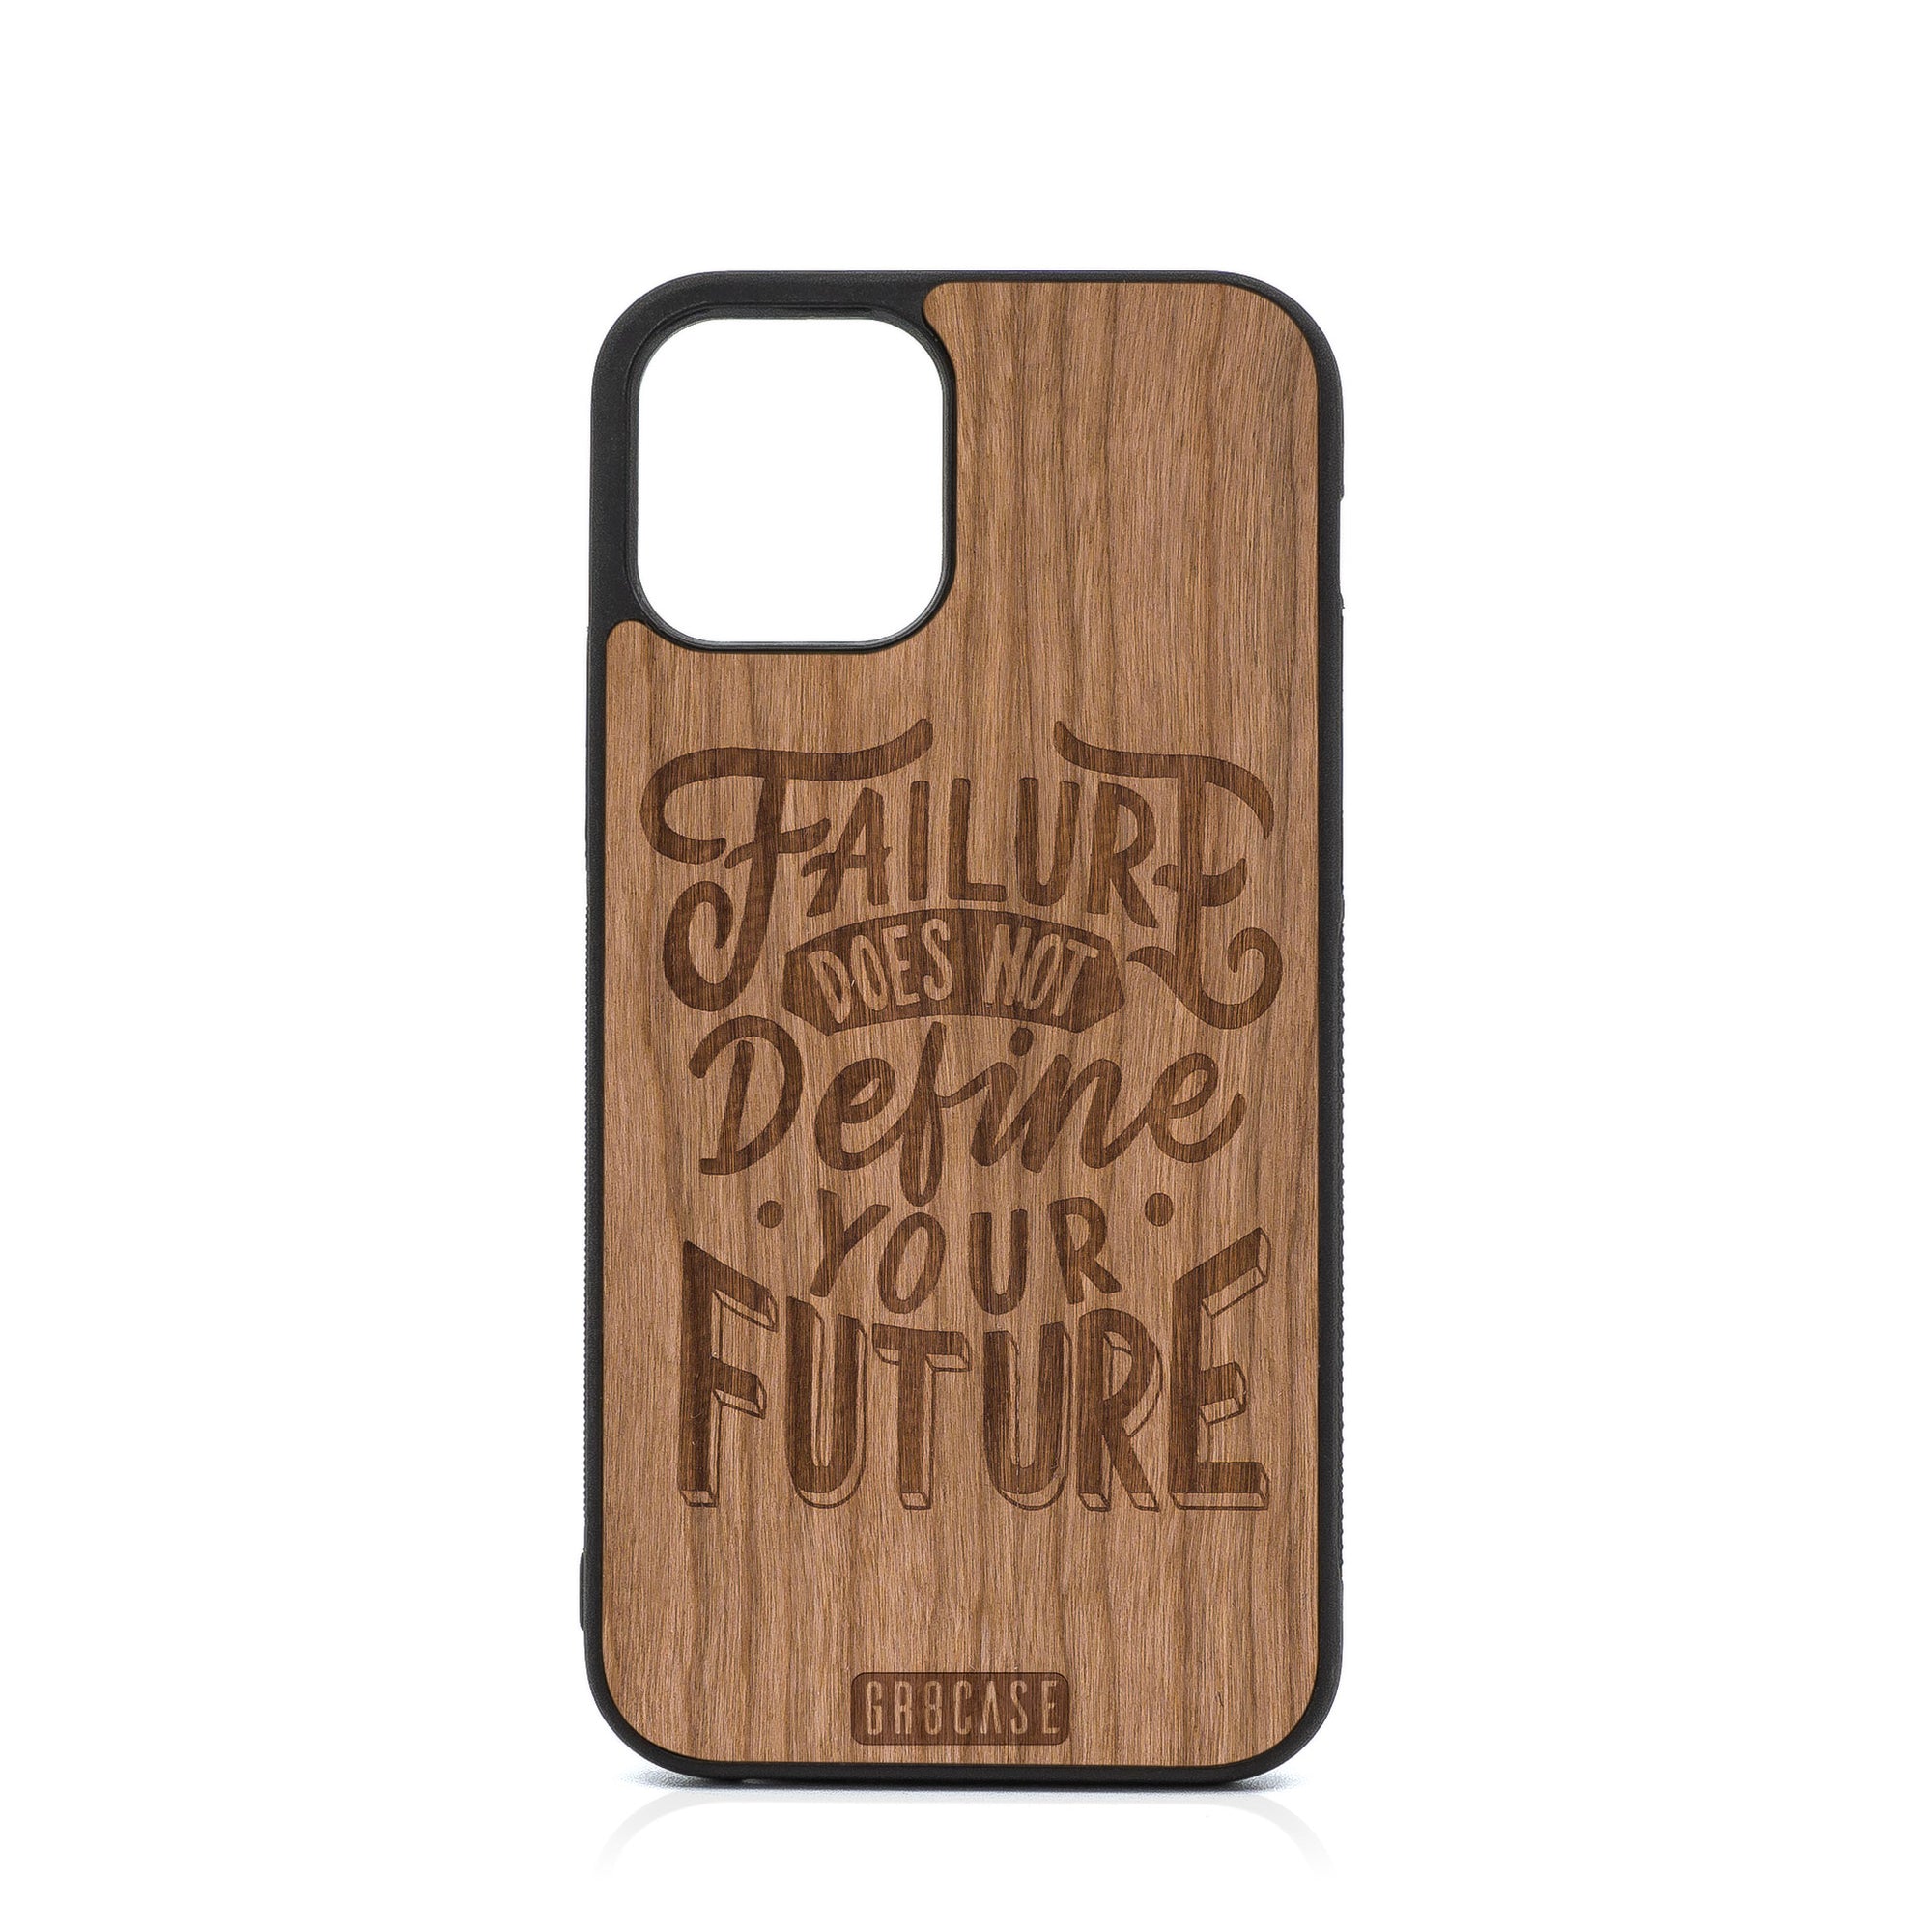 Failure Does Not Define Your Future Design Wood Case For iPhone 12 Pro